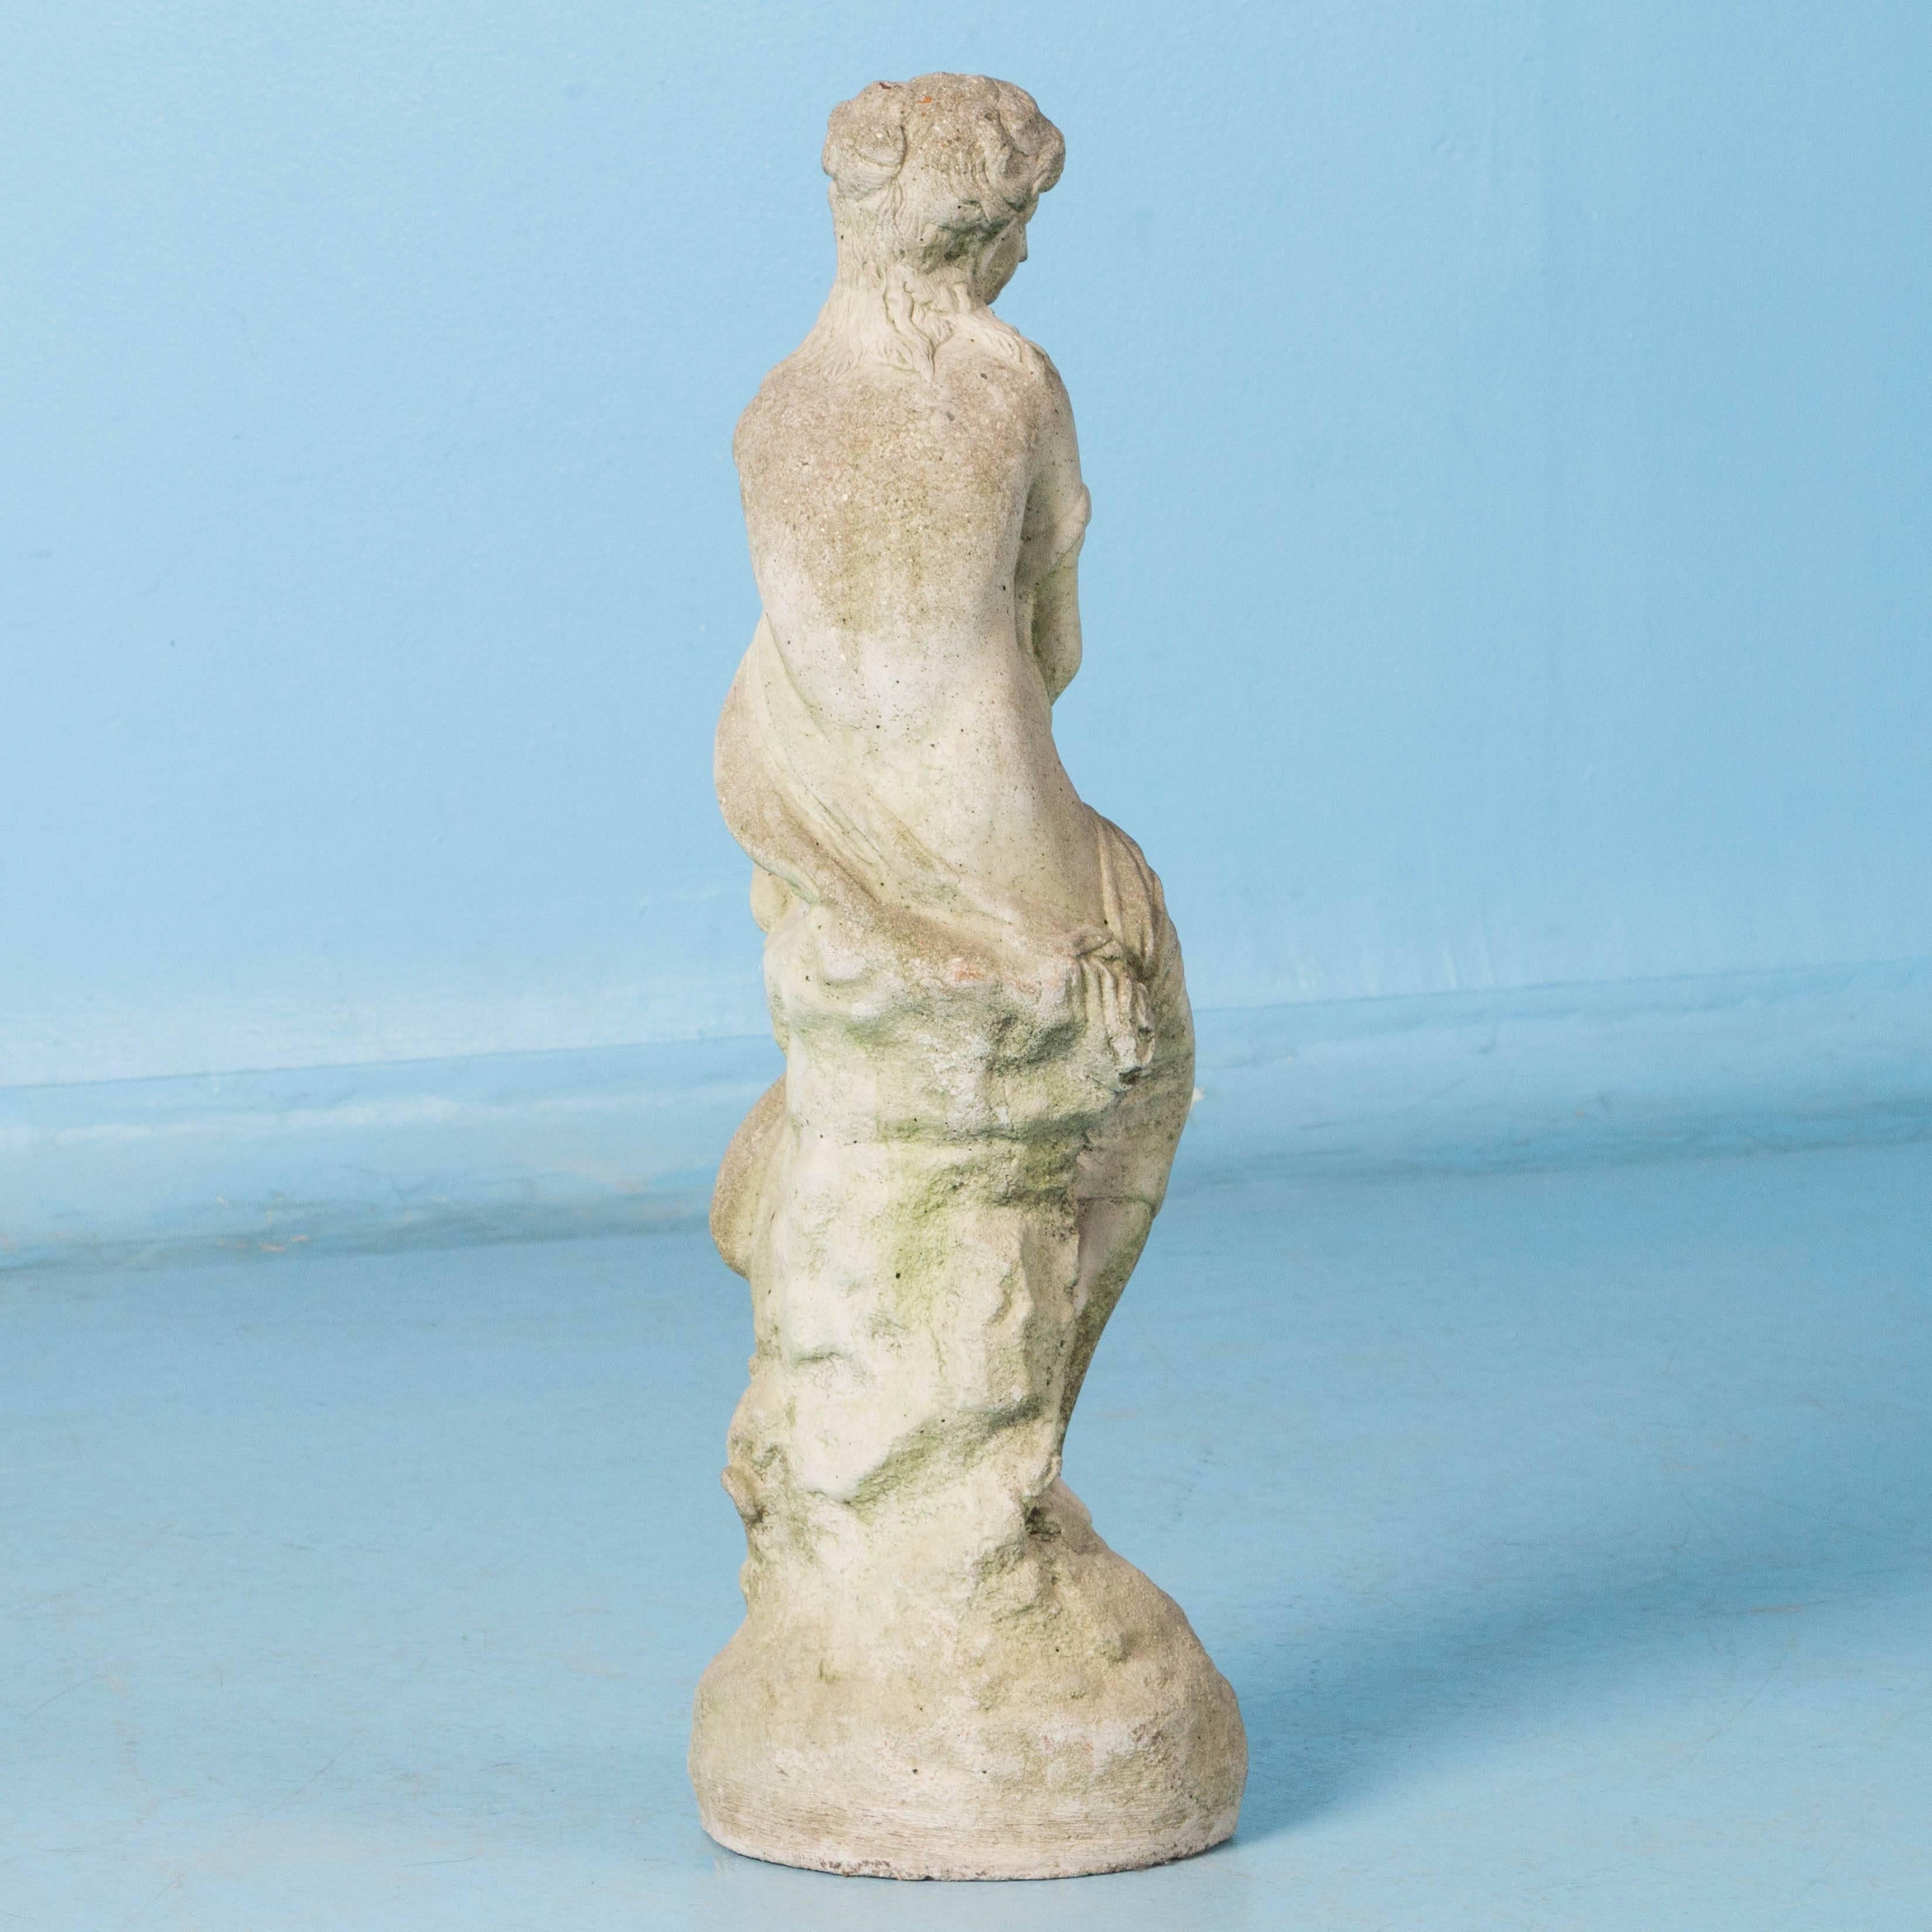 Small cast concrete figure of a robed woman, circa 1920-1940, with a very smooth weathered surface due to years of being outdoors. Having been exposed to the elements, it has an aged patina of light and dark grays with patches of light green most